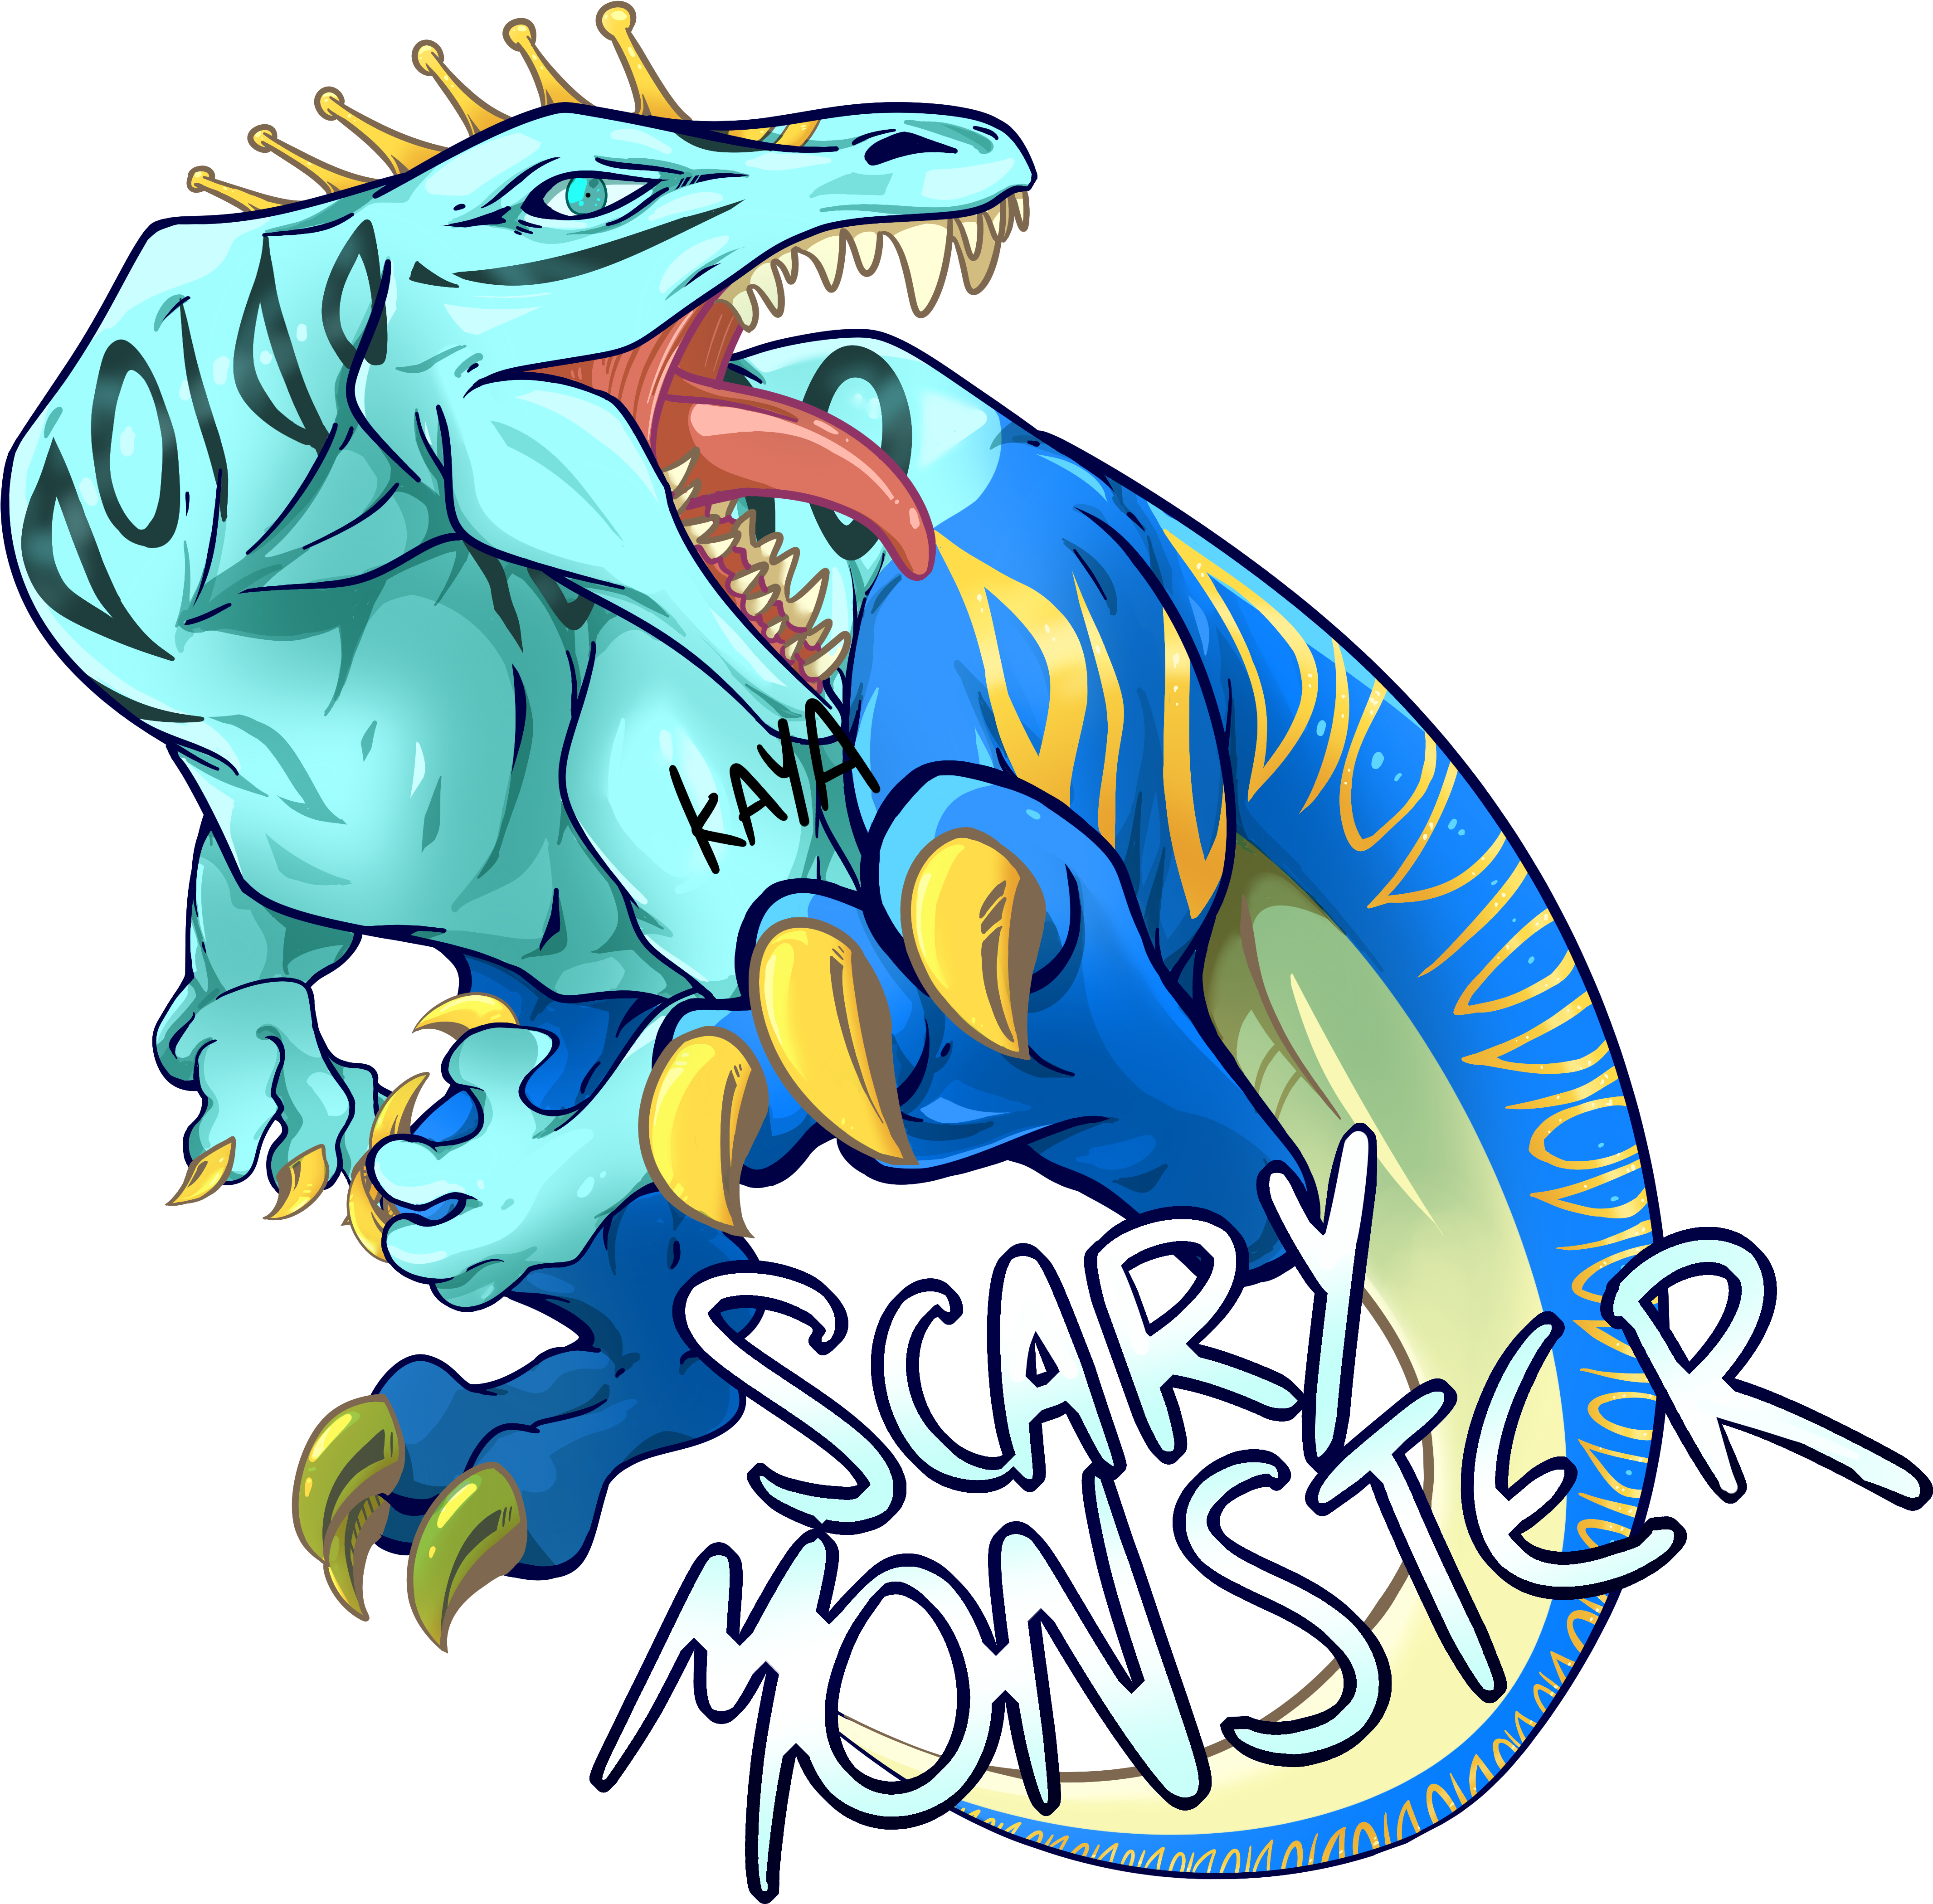 Scary Monster - Scary Monster (4800x4350)